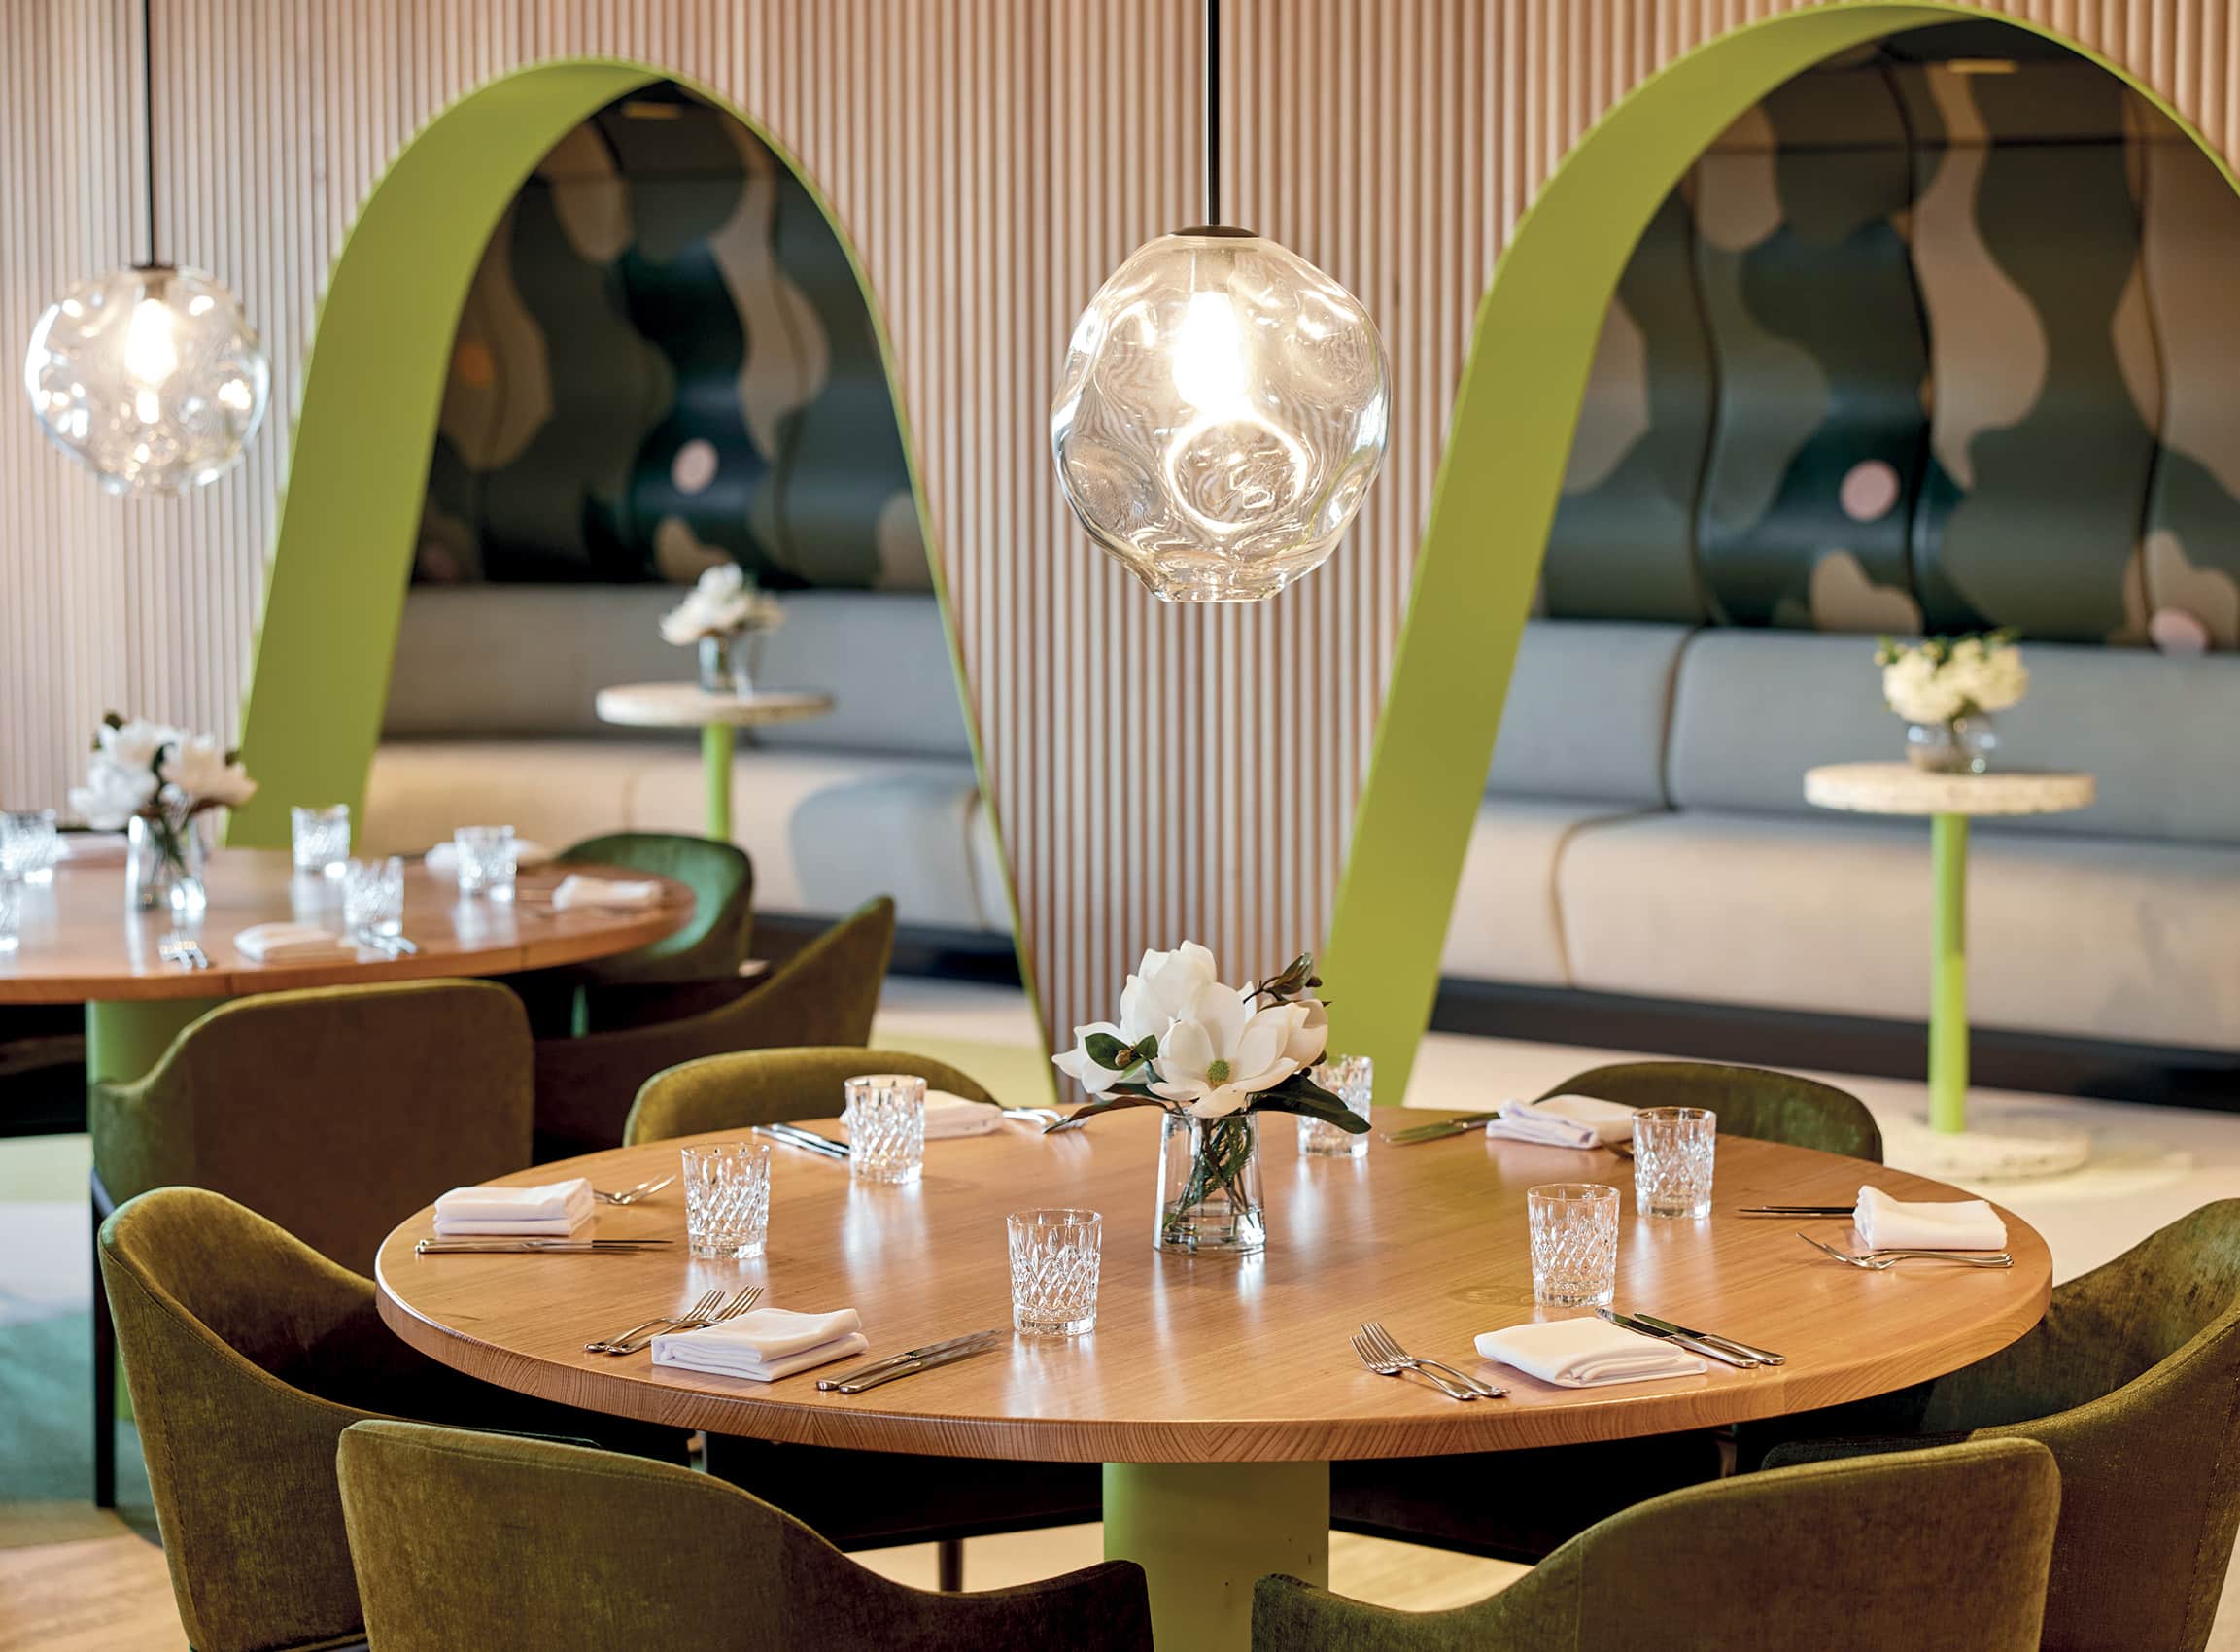 Head up to the 15th floor and let every sense be awakened at The Alba restaurant. 